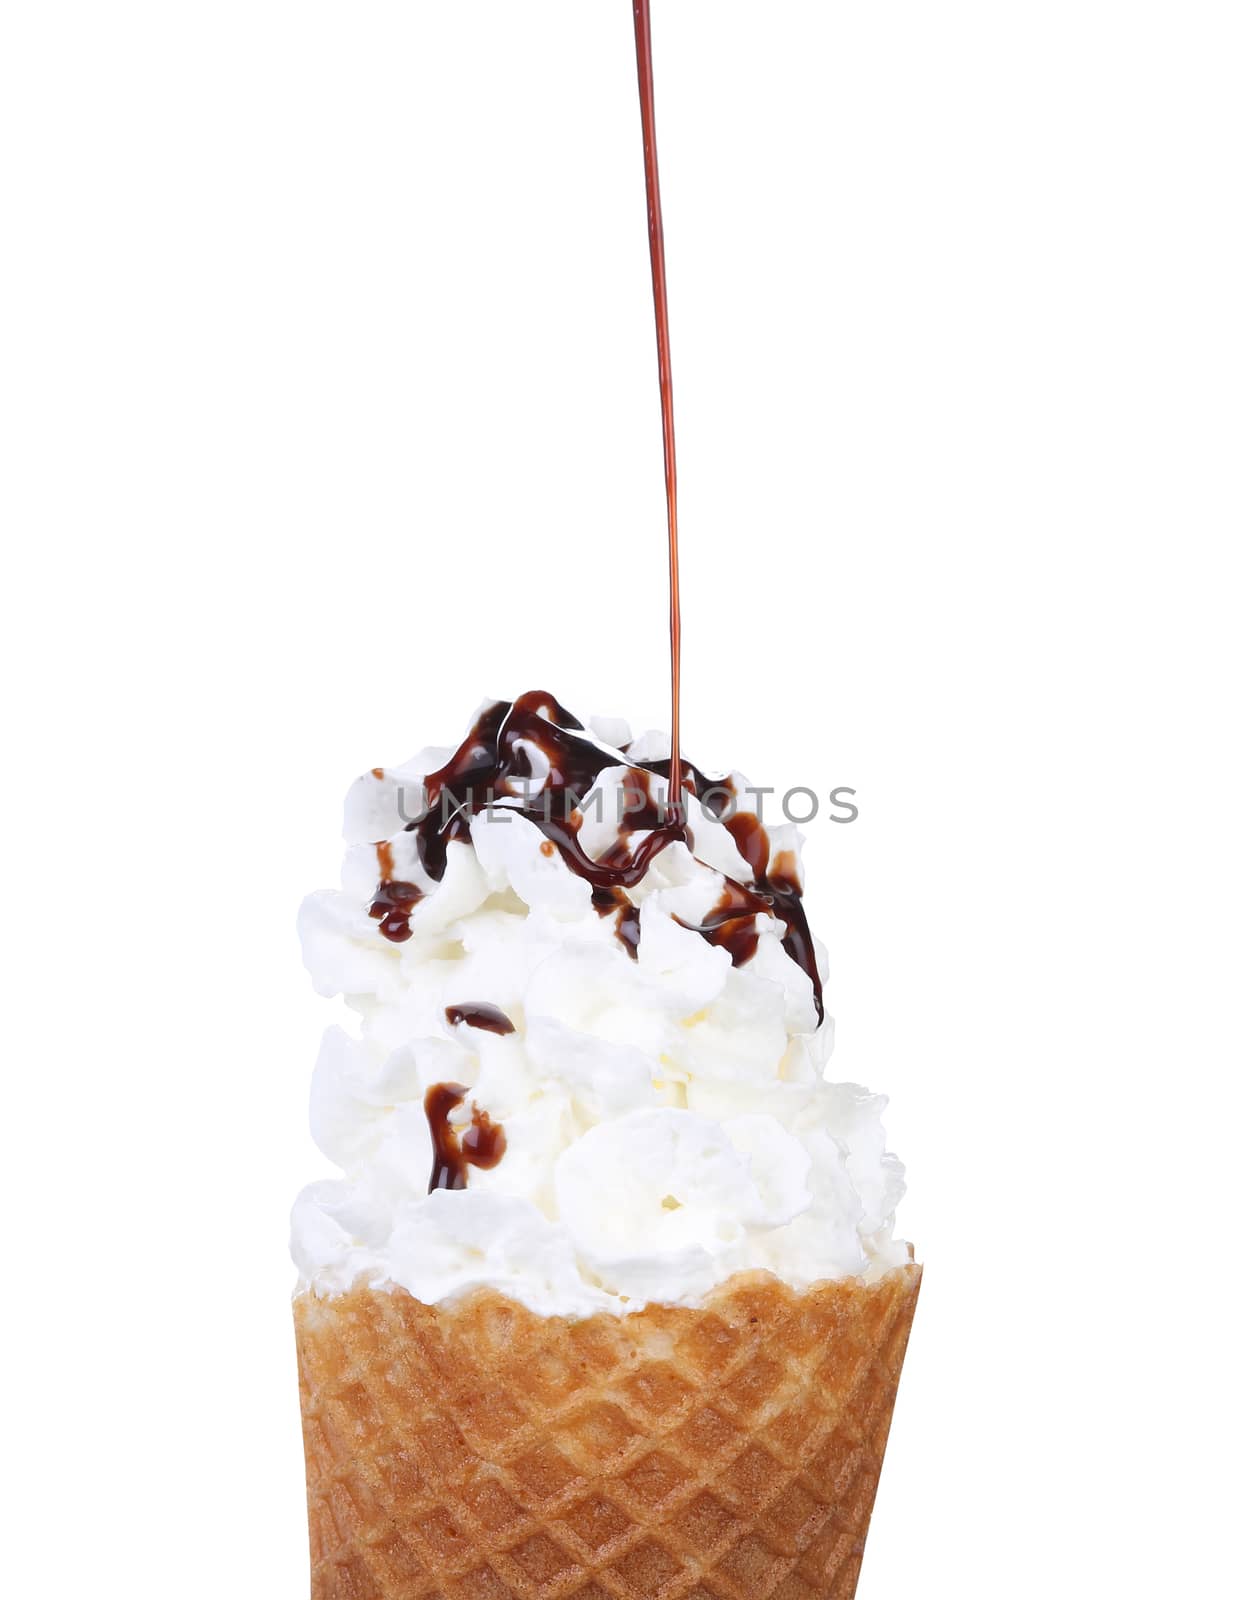 Soft serve ice cream. Topping chocolate. White background.